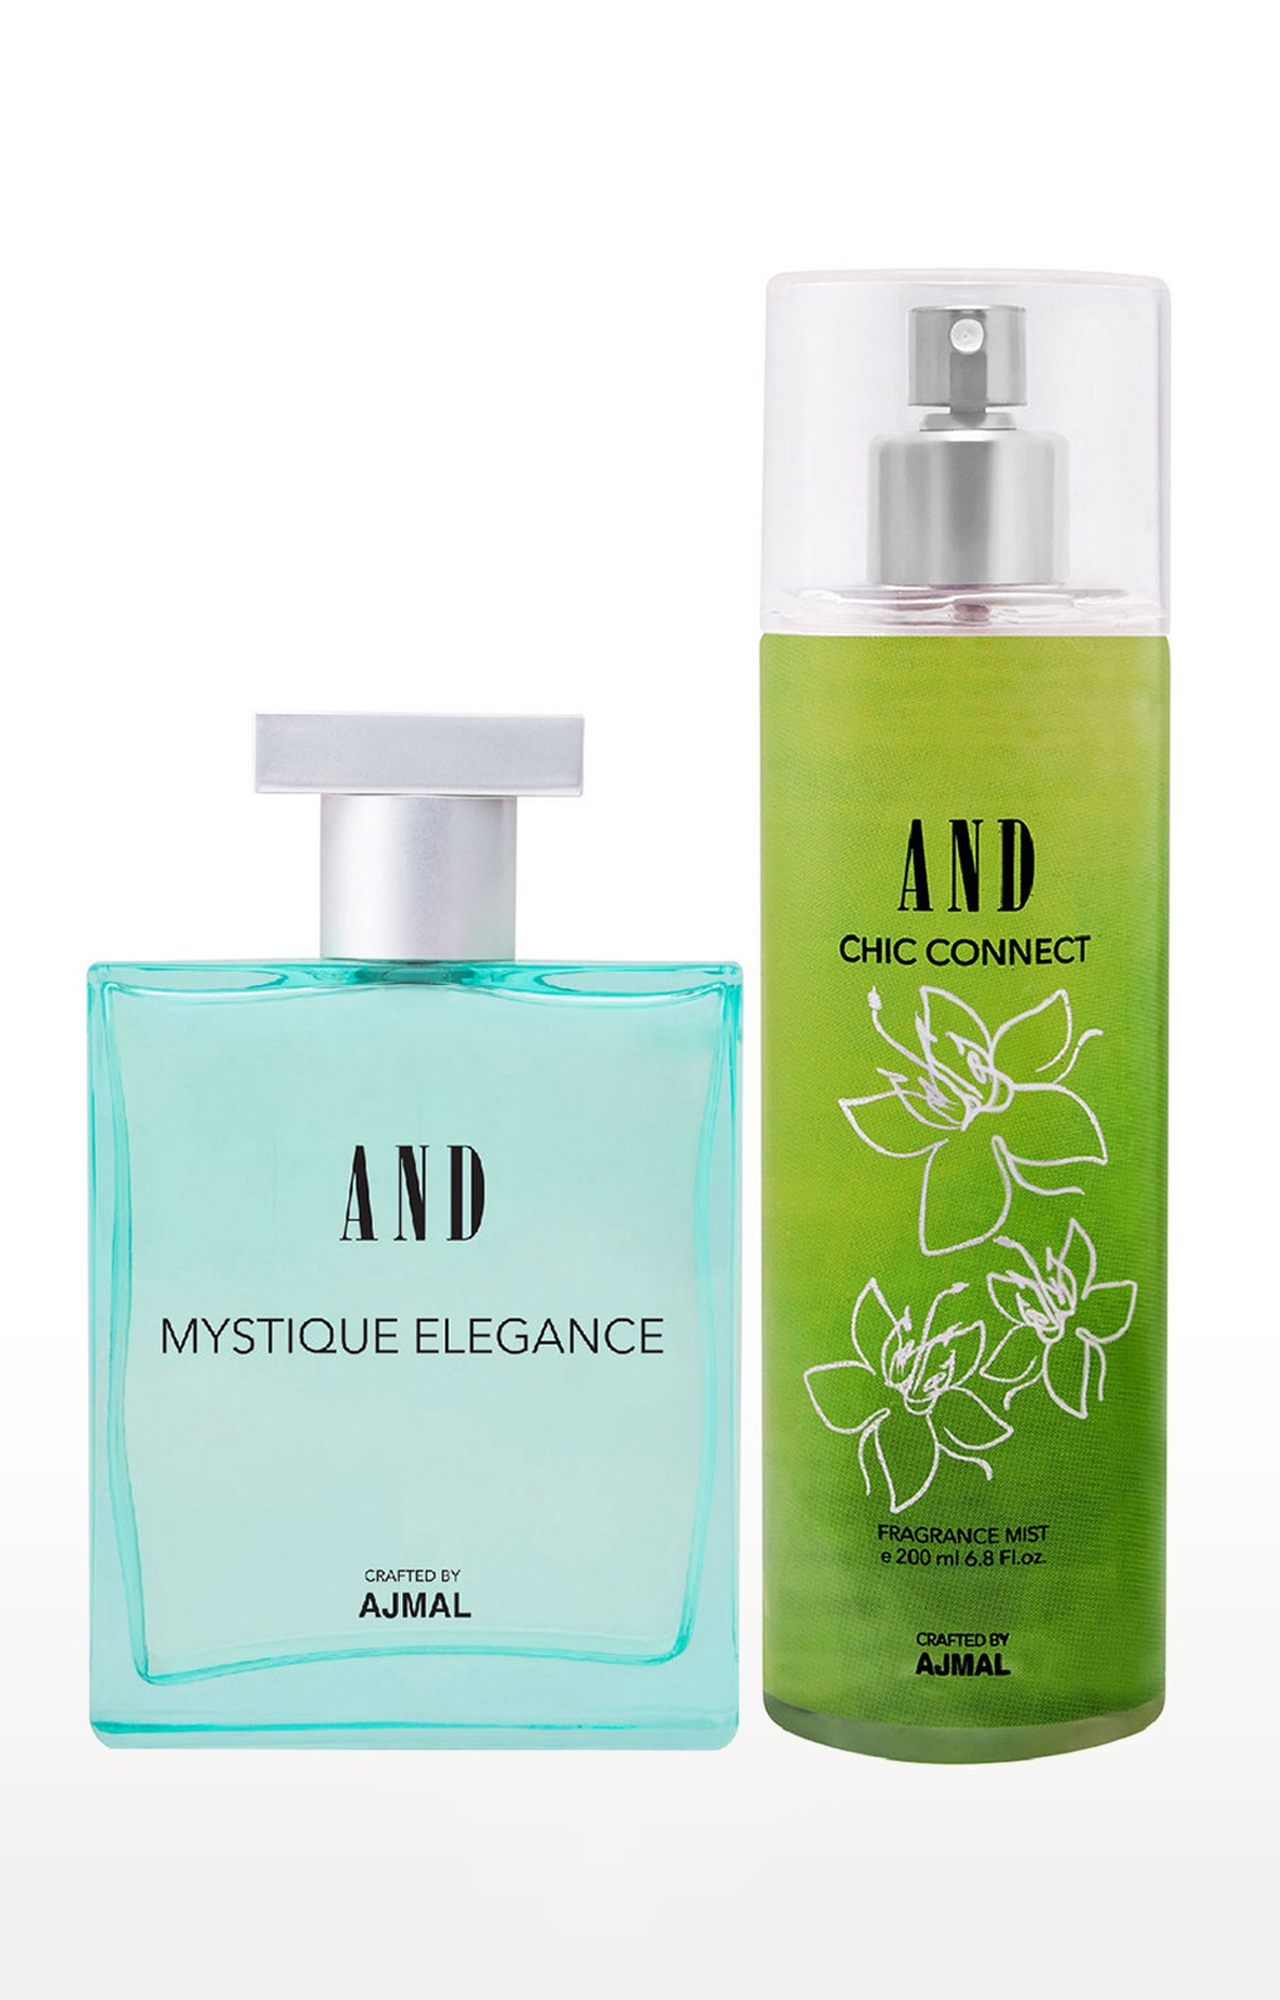 AND Mystique Elegance Eau De Parfum 100ML & Chic Connect Body Mist 200ML Pack of 2 for Women Crafted by Ajmal 